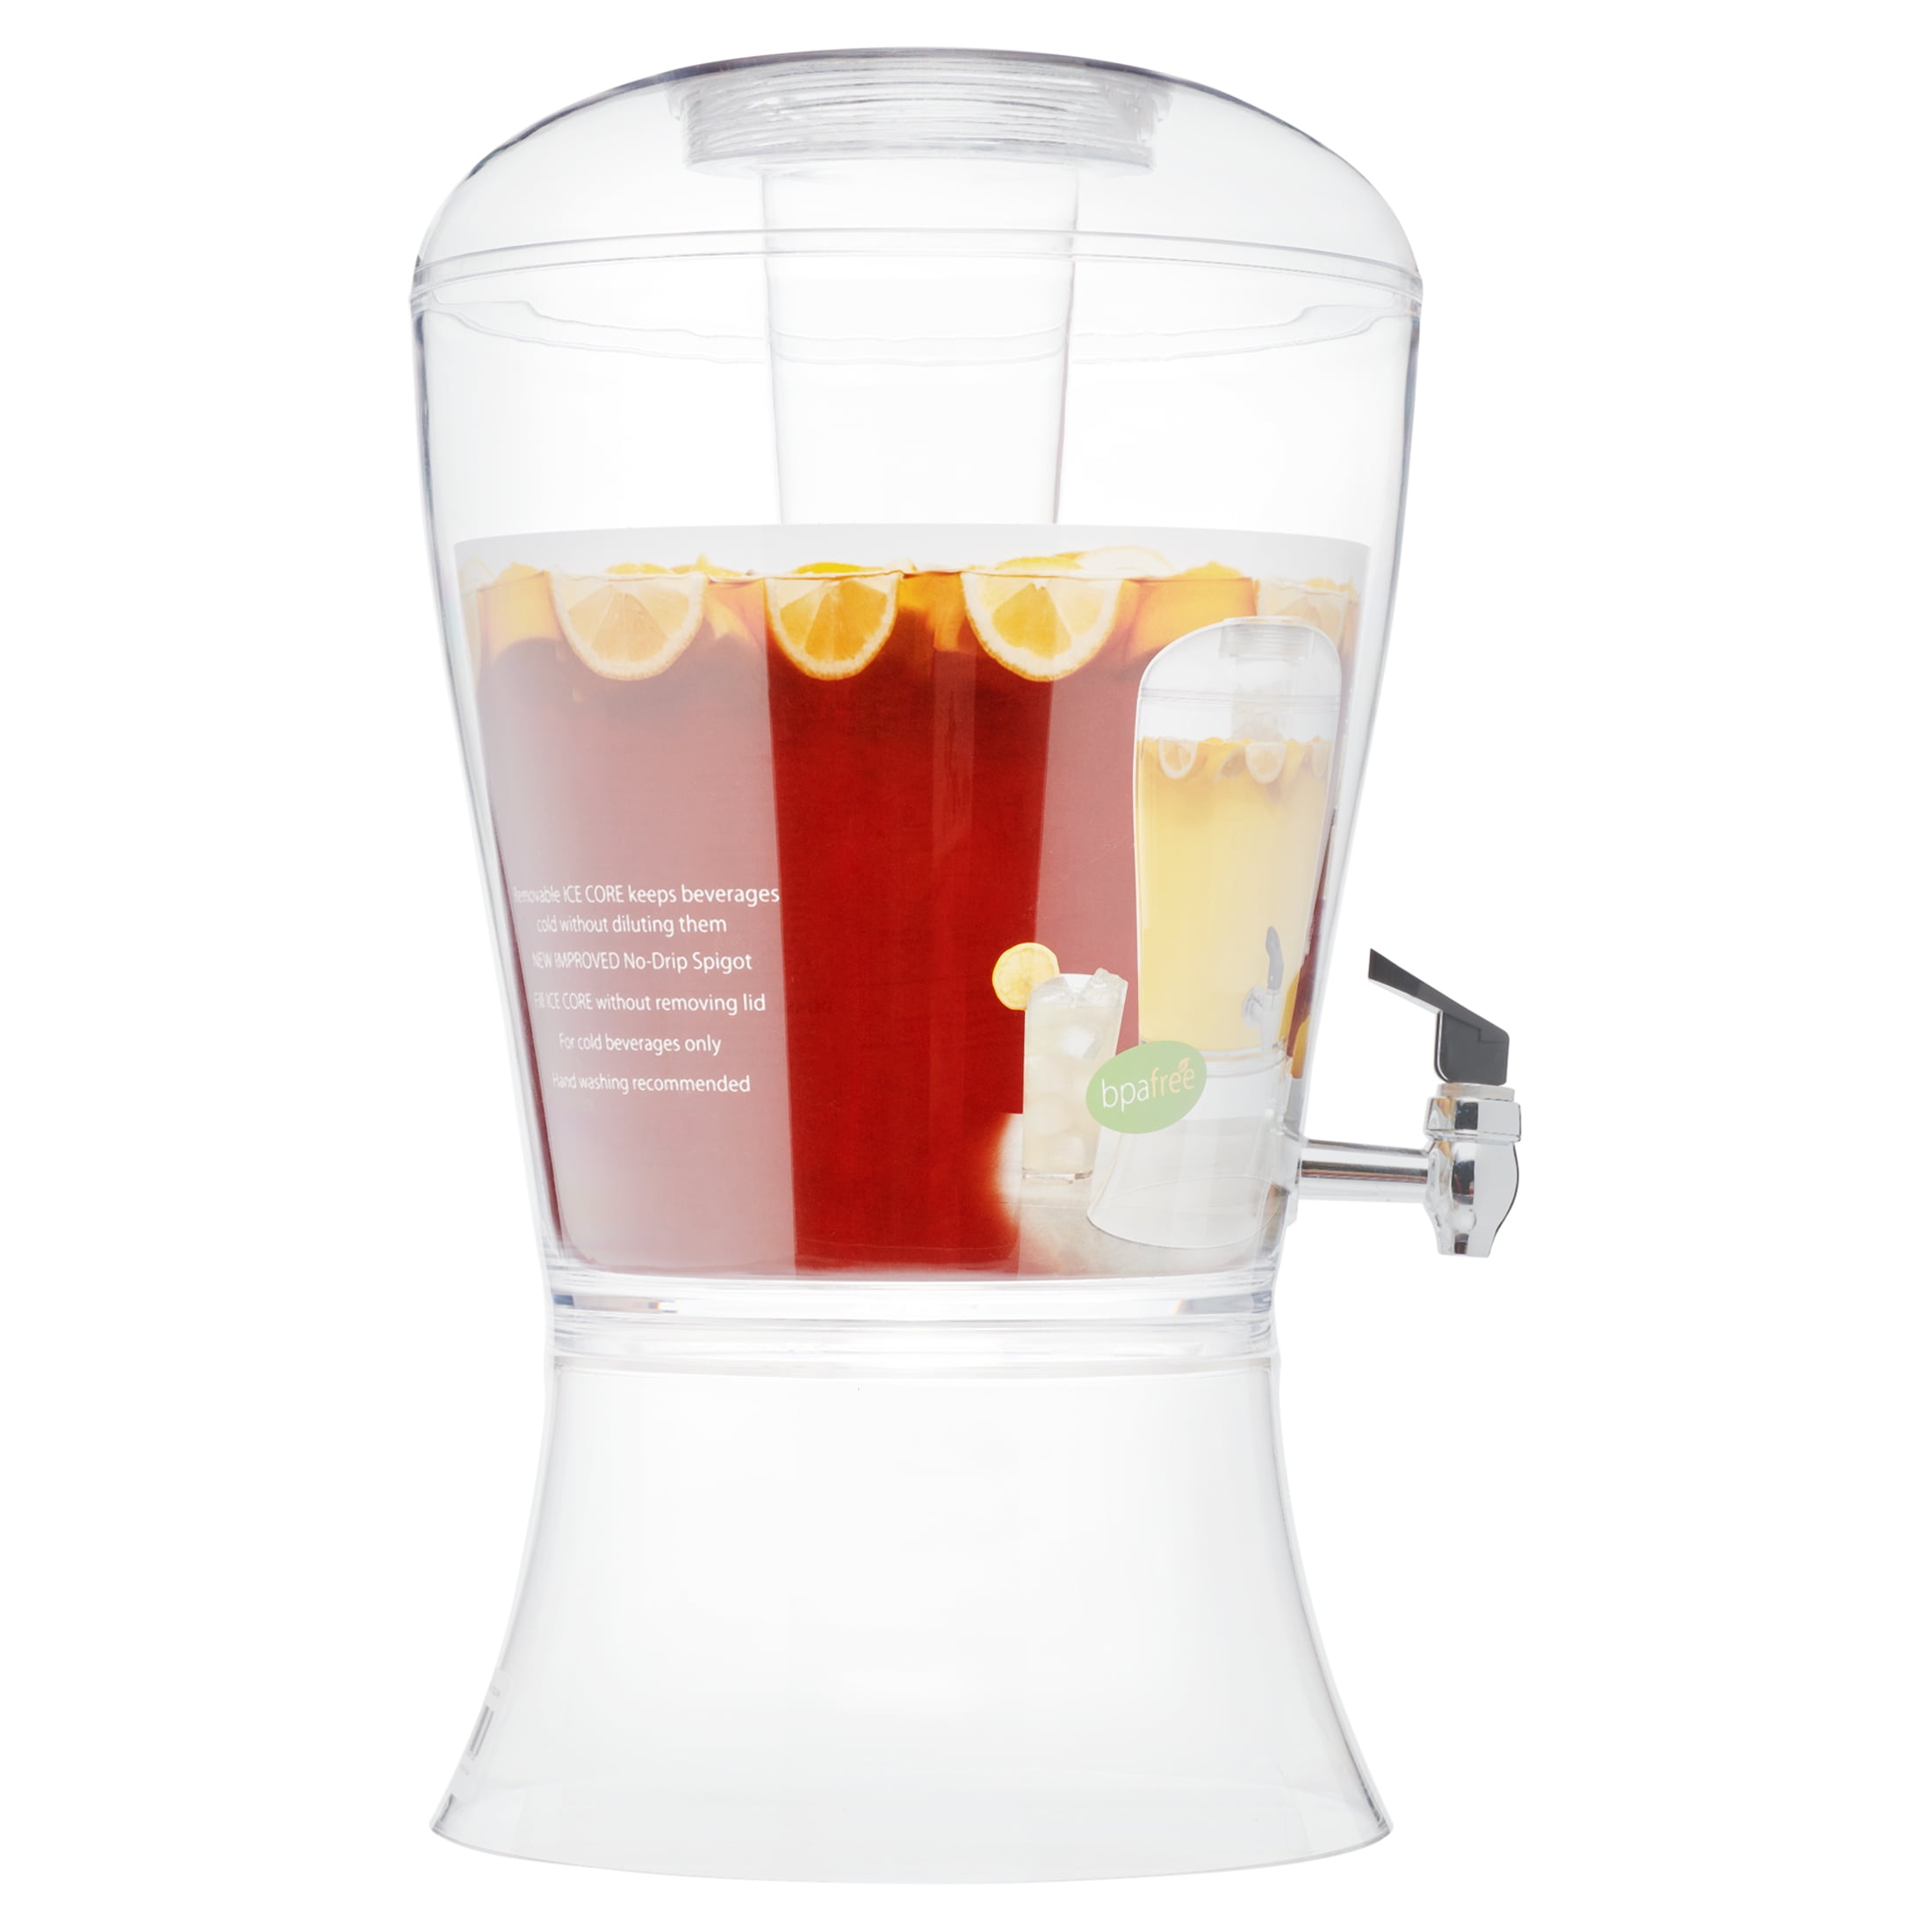 Large 3 Litre Plastic Drink Dispenser with Tap Ideal for Beer/Cocktails/Cold Beverages/Ice Tea/Water Glass 